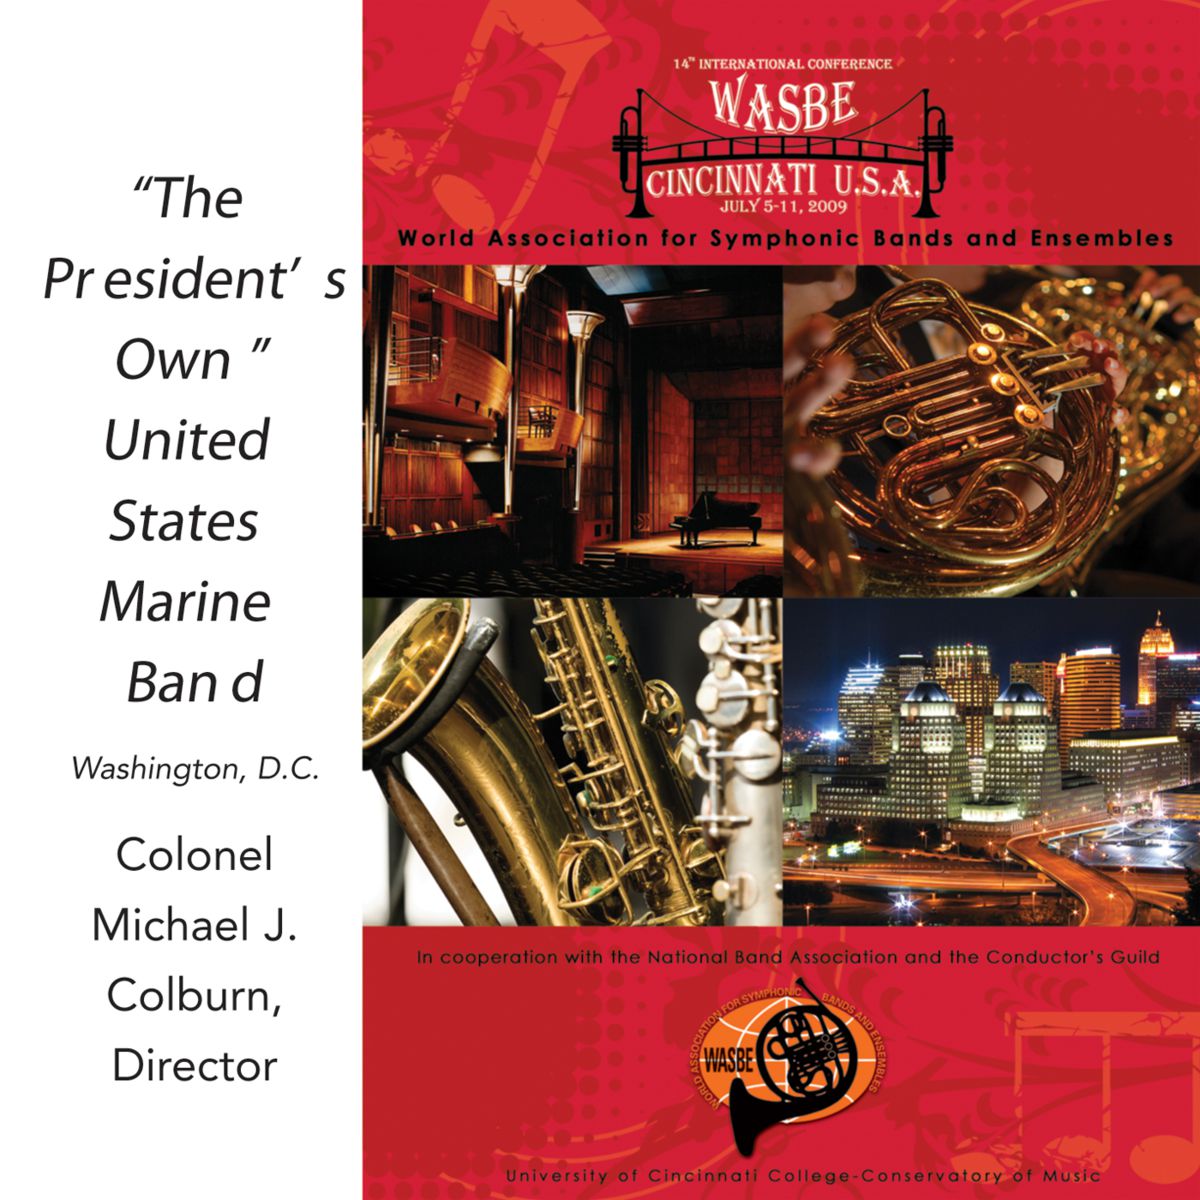 2009 WASBE Cincinnati, USA: "The Presidents Own" United States Marine Band - cliquer ici